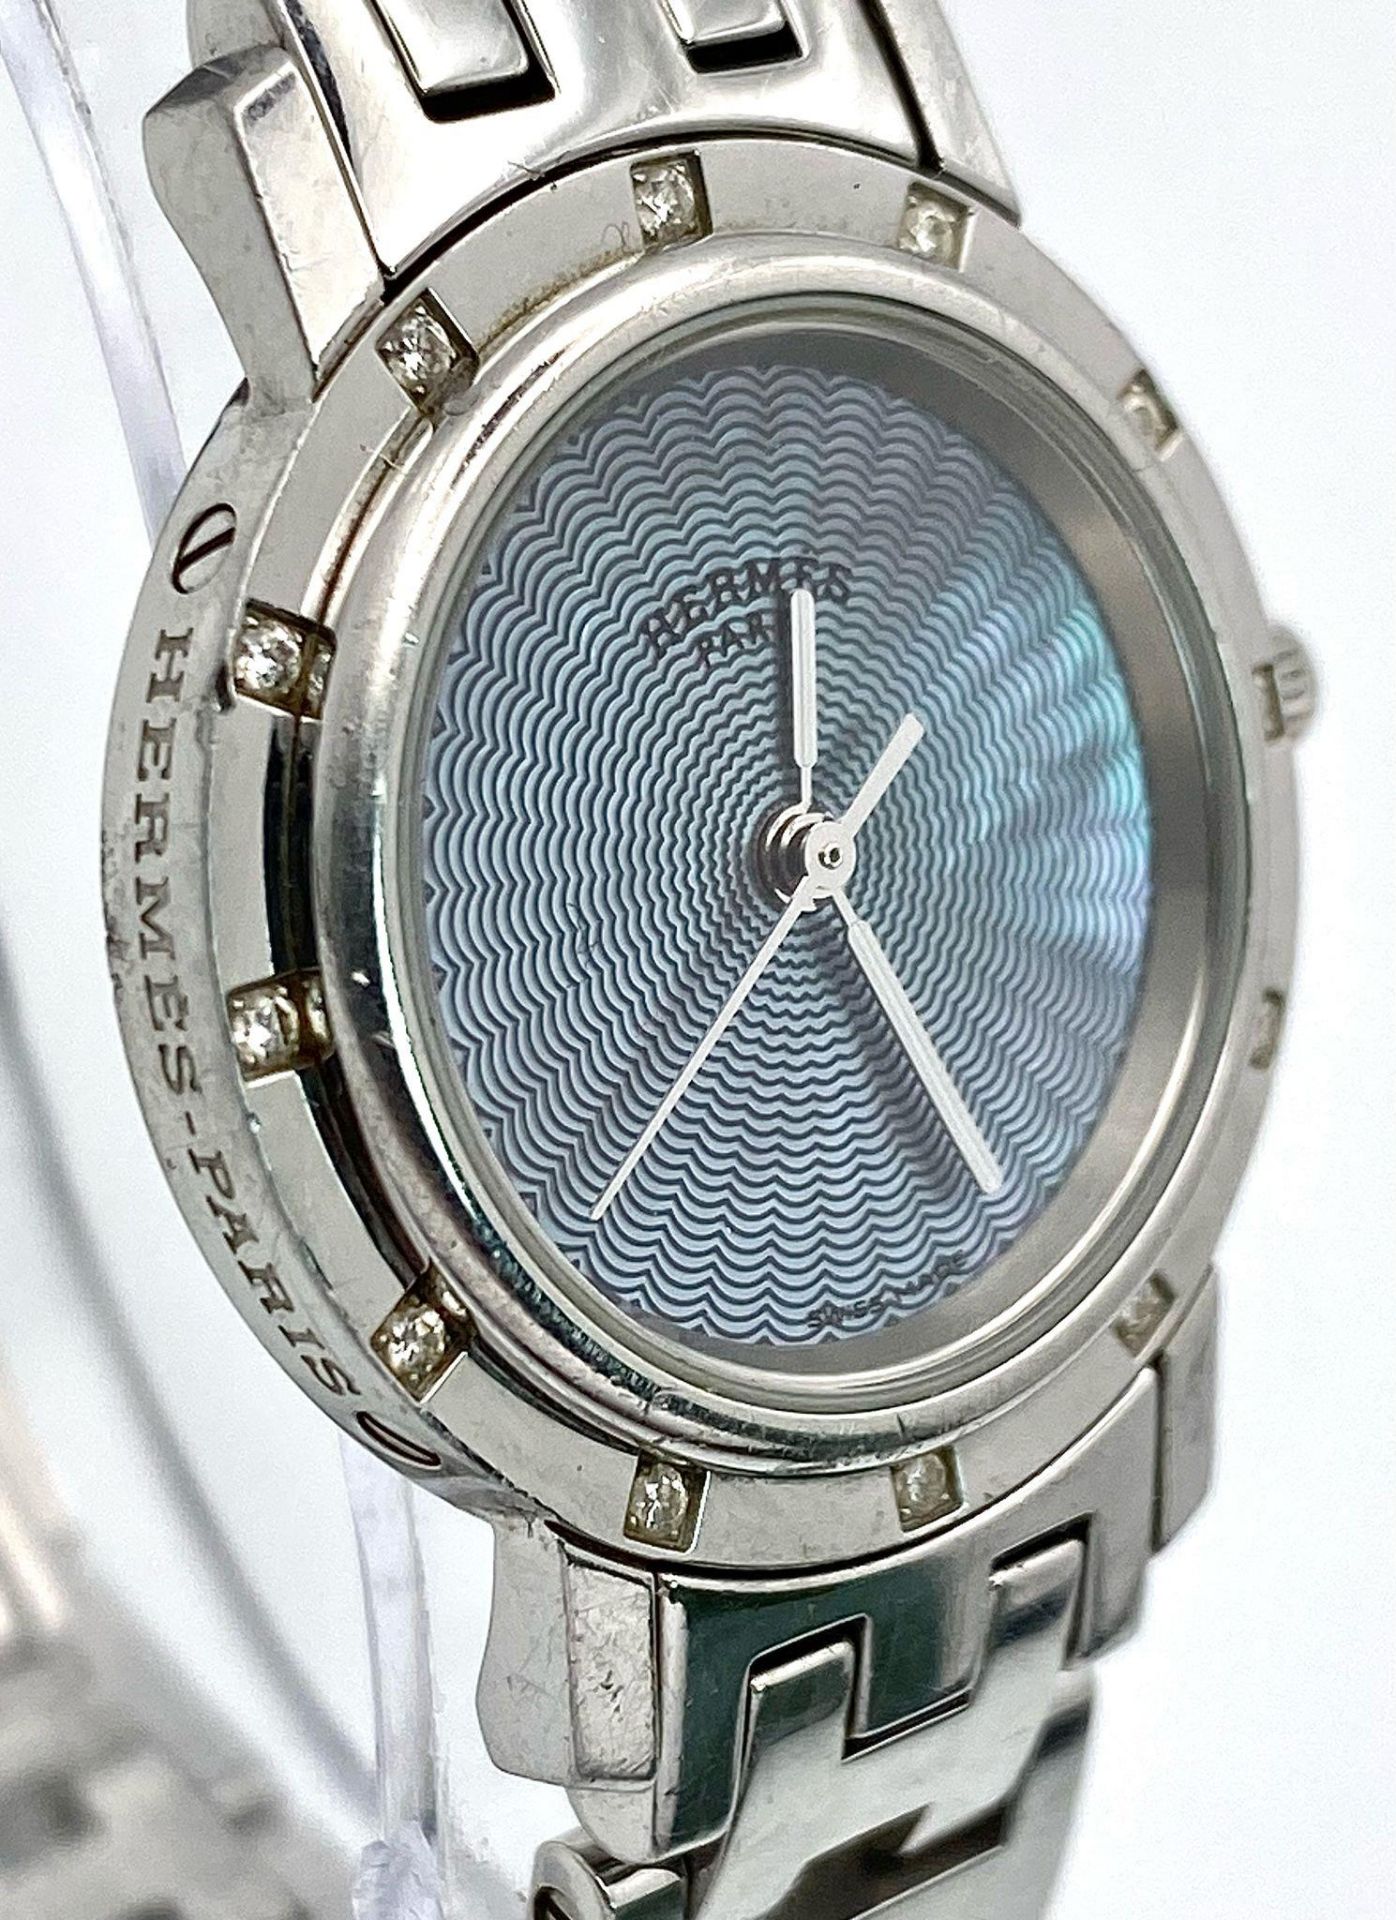 A "HERMES" STAINLESS STEEL LADIES QUARTZ WATCH WITH DIAMOND OUTER BEZEL. 24mm - Image 4 of 8